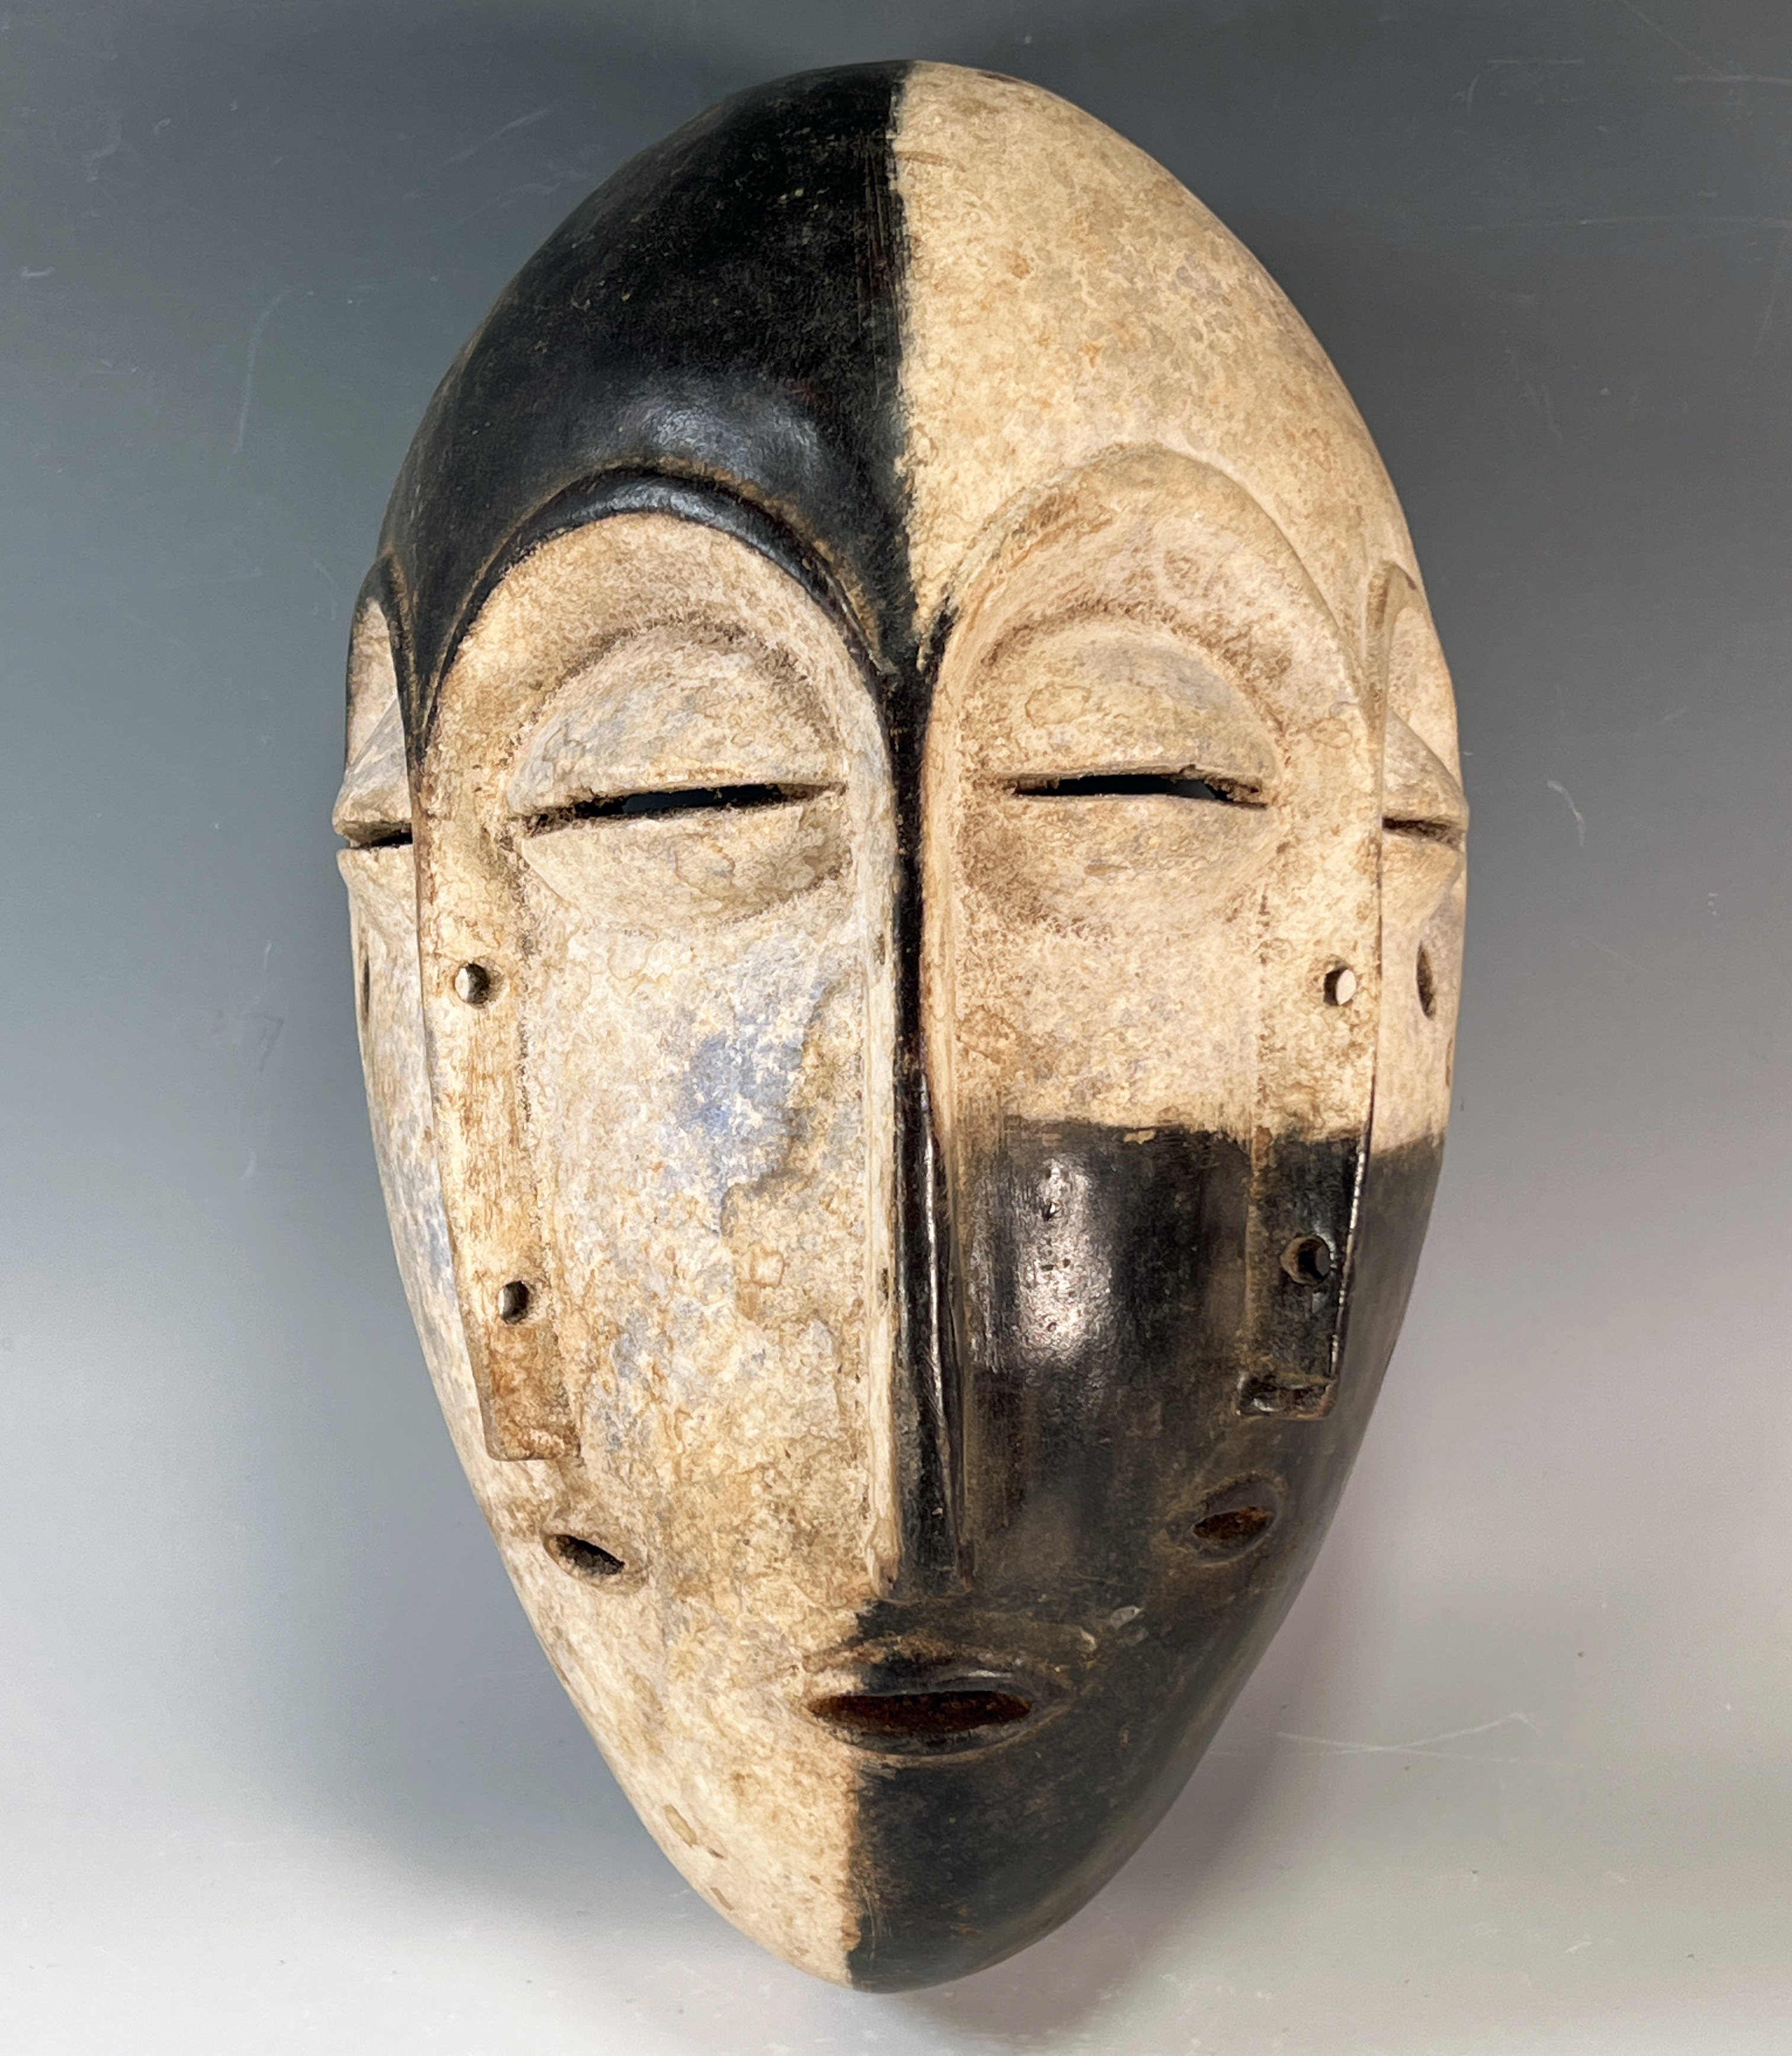 Multiple Faces Mask Lengola Congo Central Africa image 1